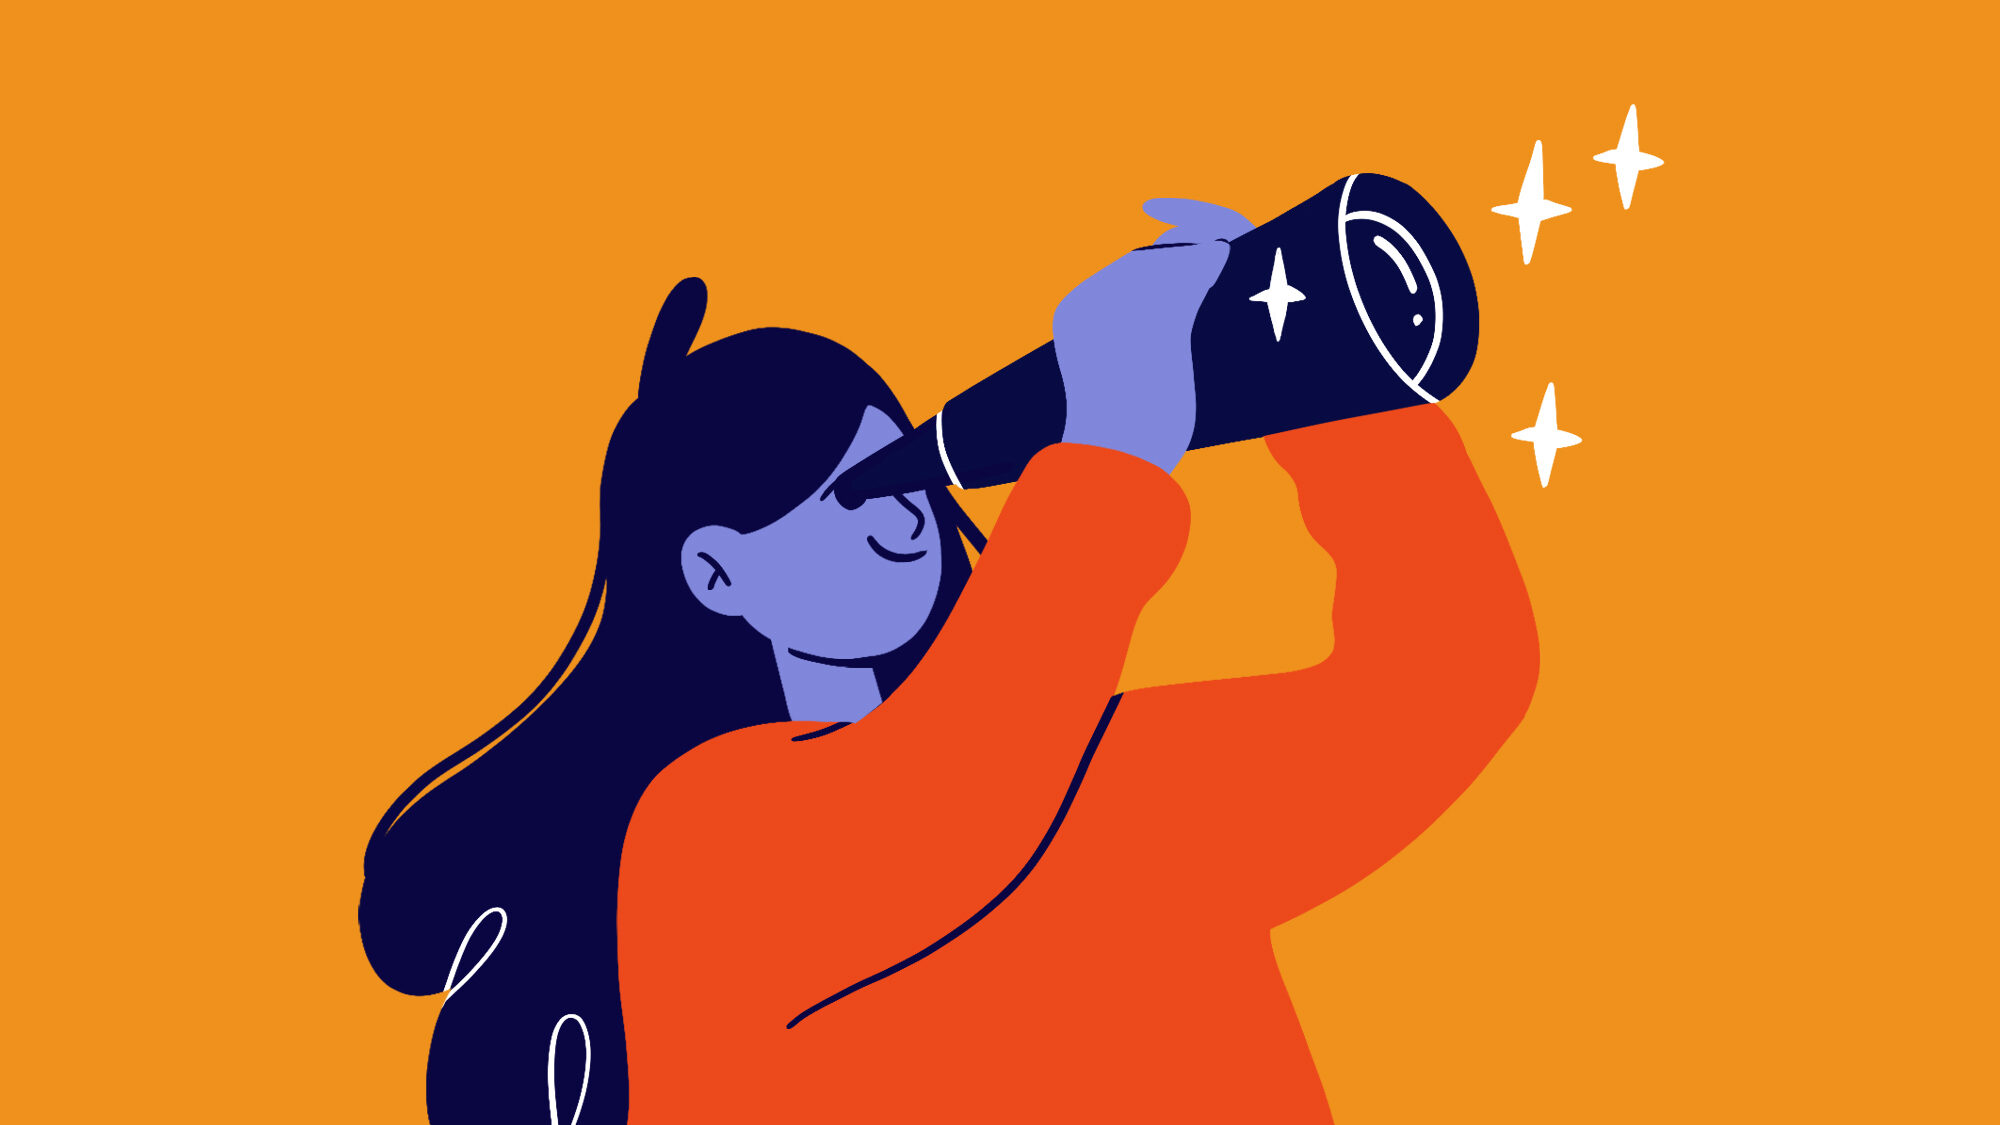 Illustration of woman looking through a telescope.